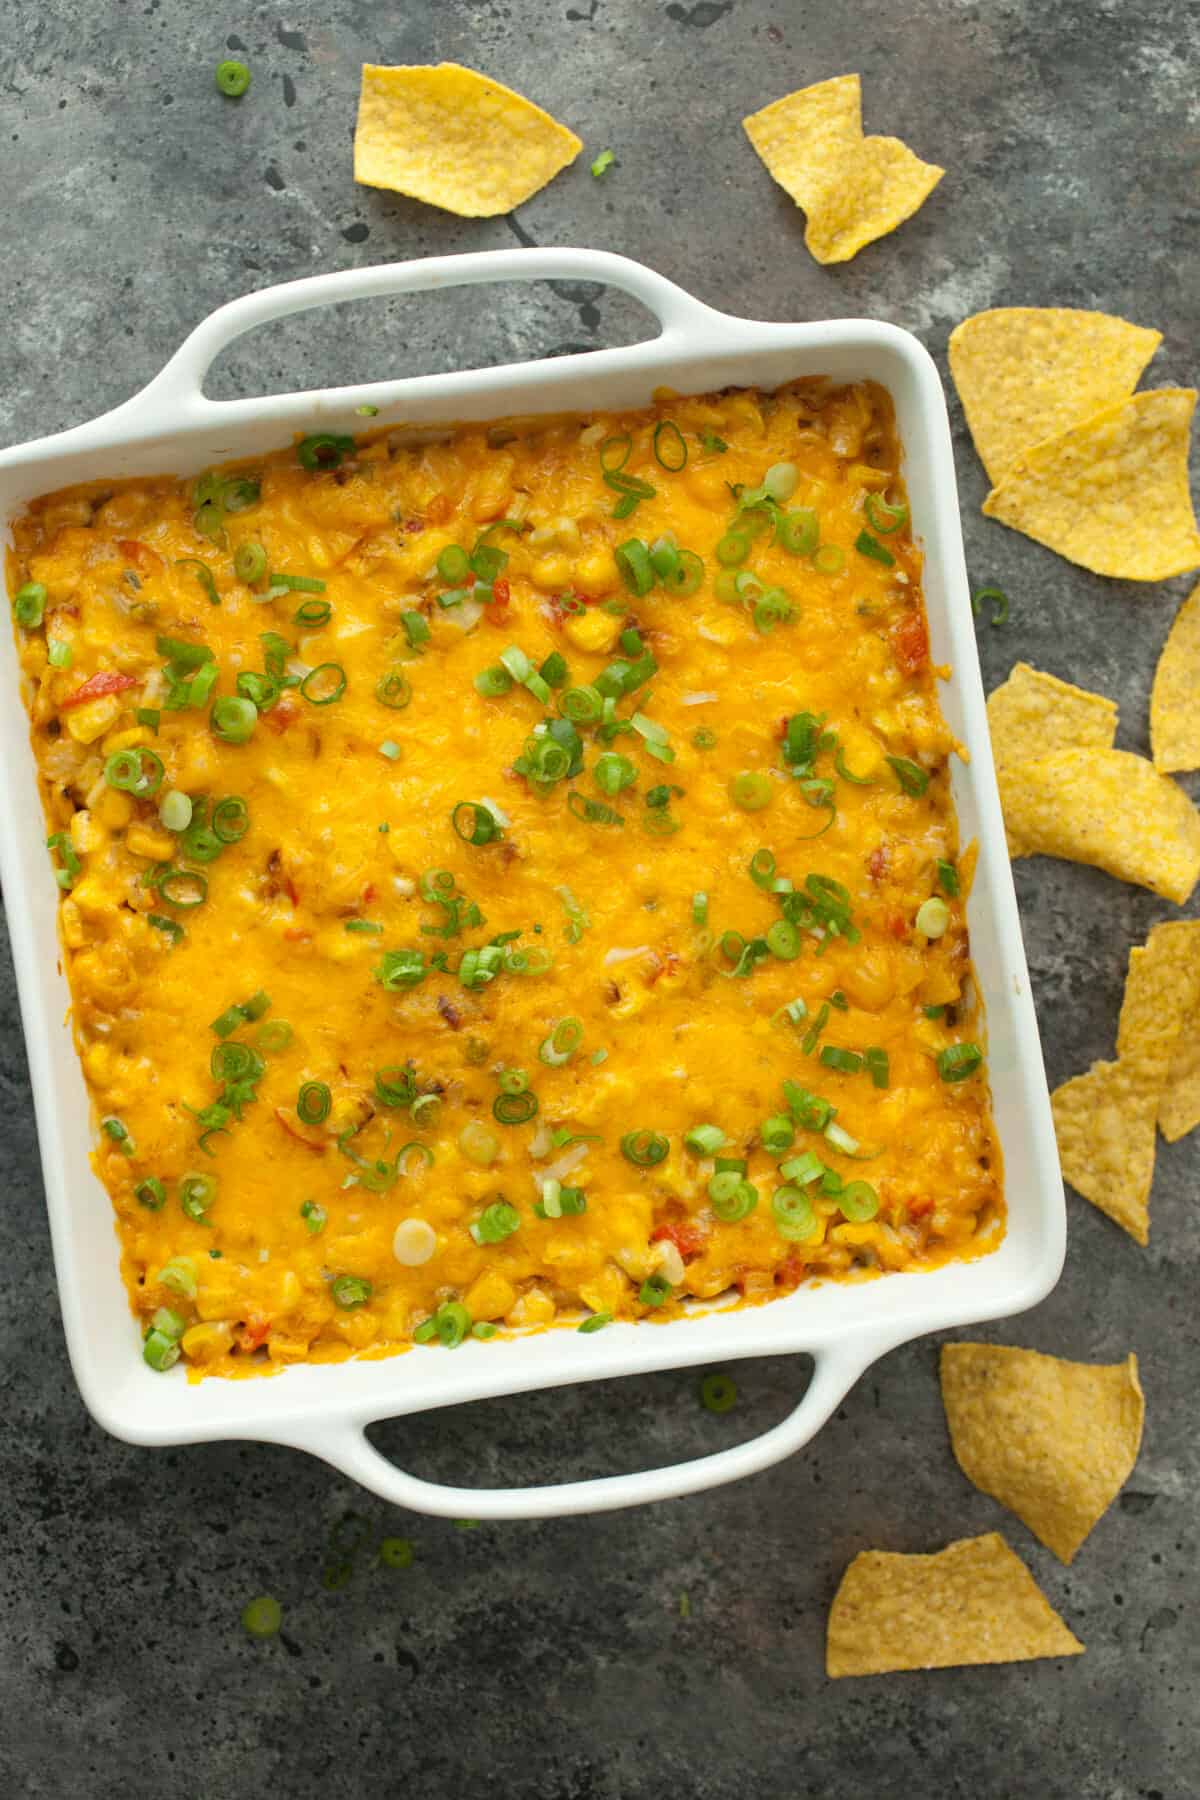 Spicy Corn Dip: Fresh sweet corn is the perfect base for this simple and delicious baked dip. Make it when corn is cheap and delicious! | macheesmo.com